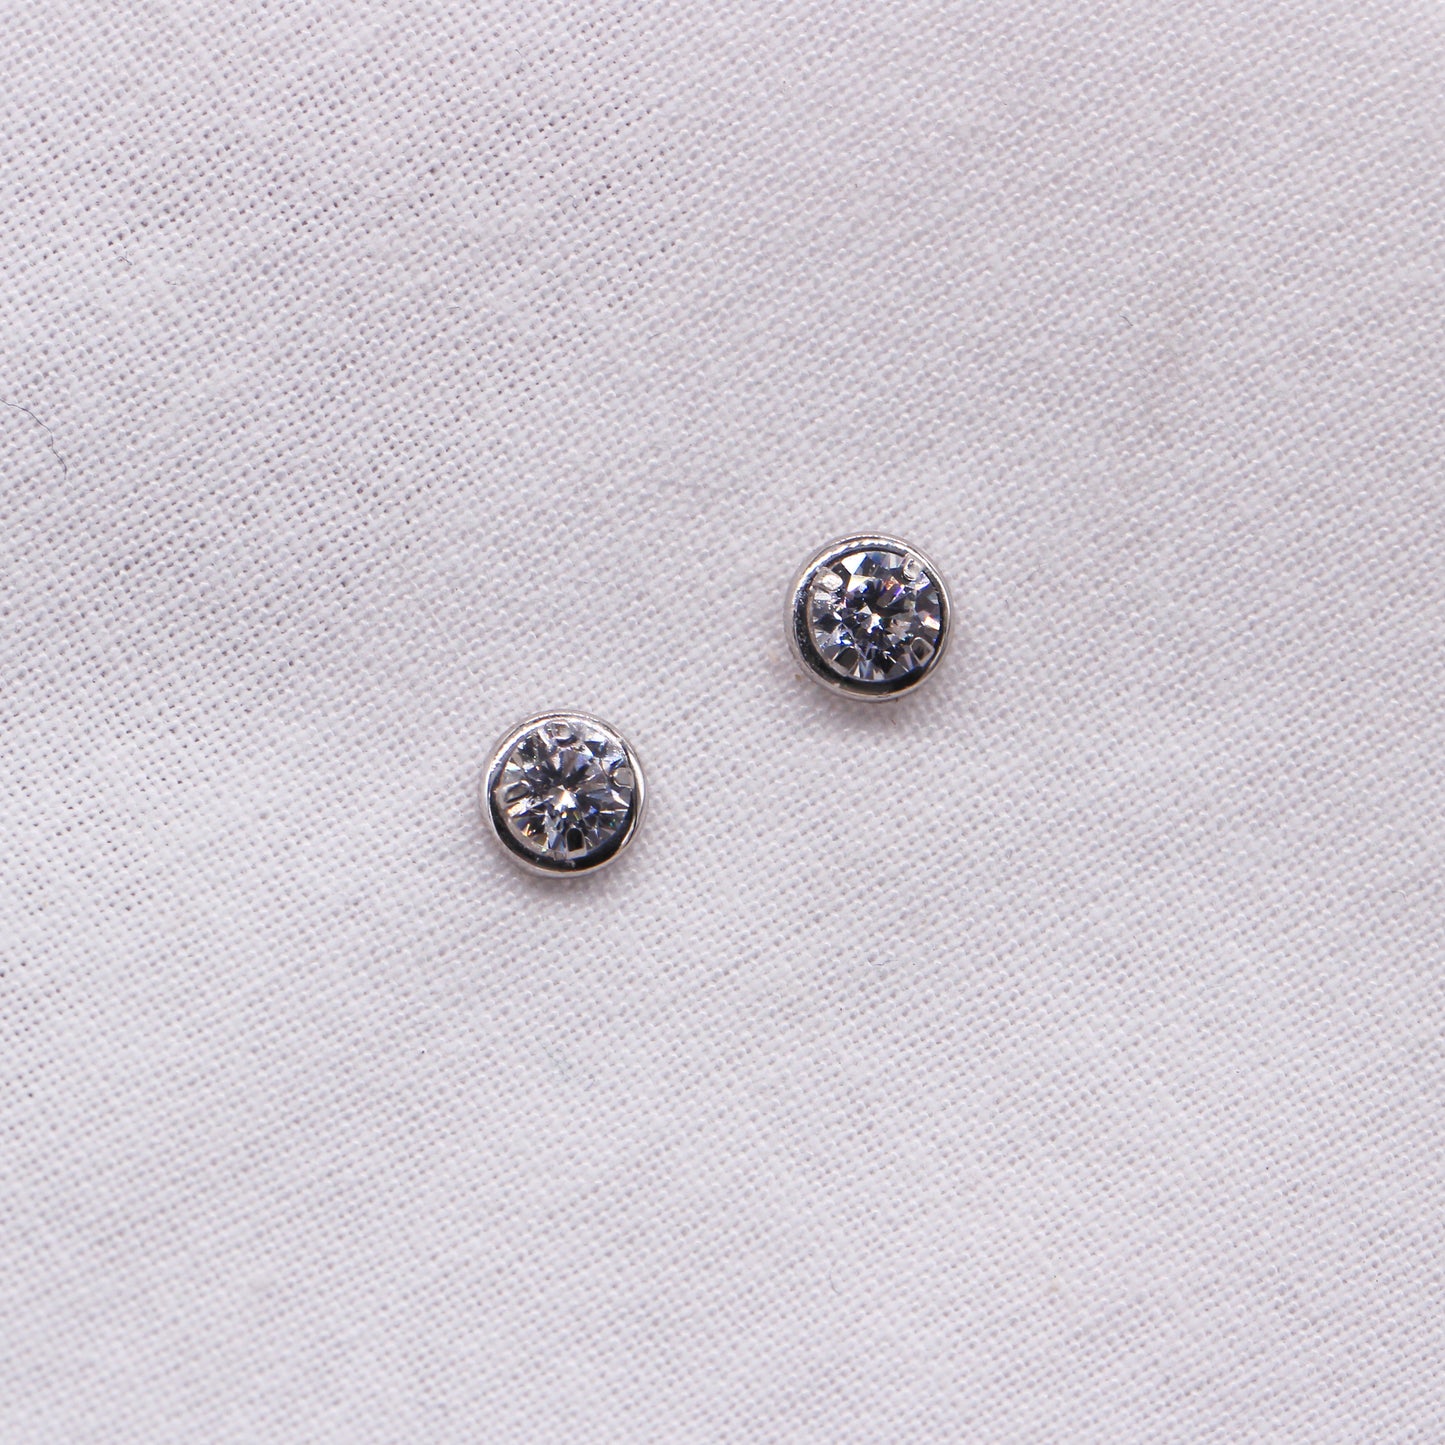 9ct Solid White Gold And Cz Stud Earrings